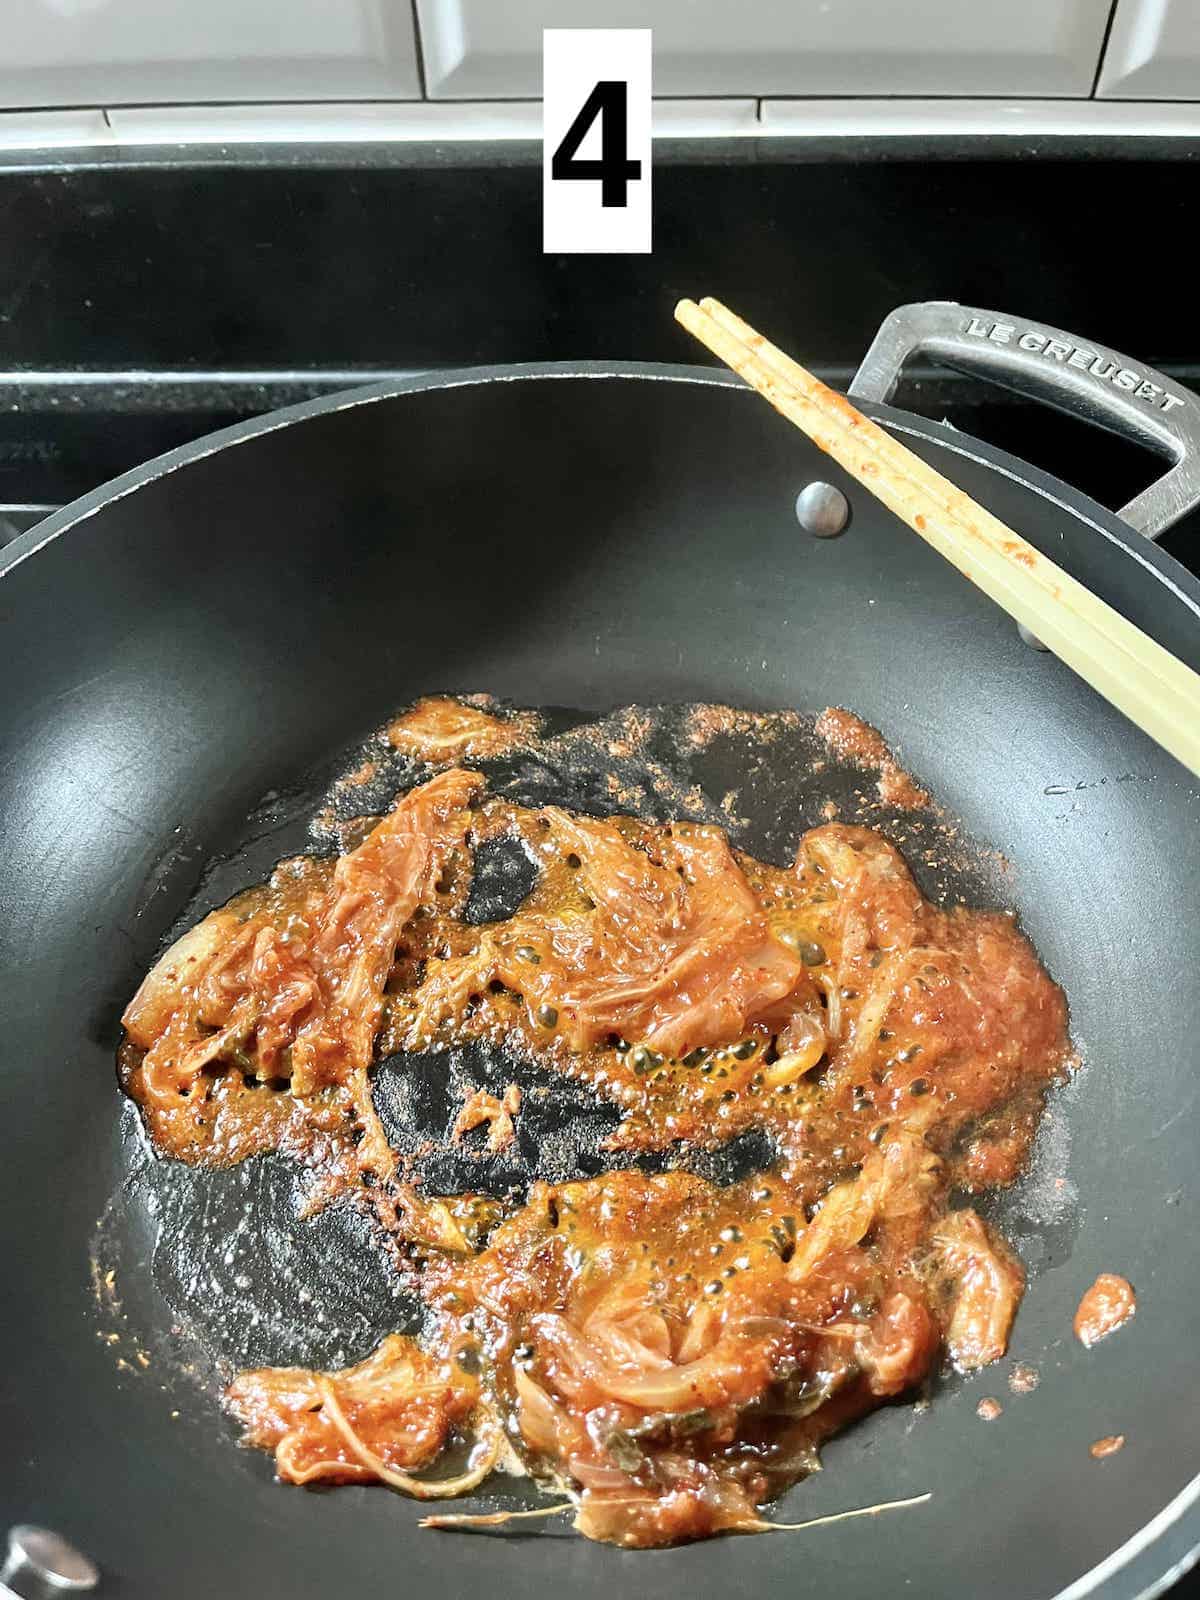 Kimchi sizzling in a pan.